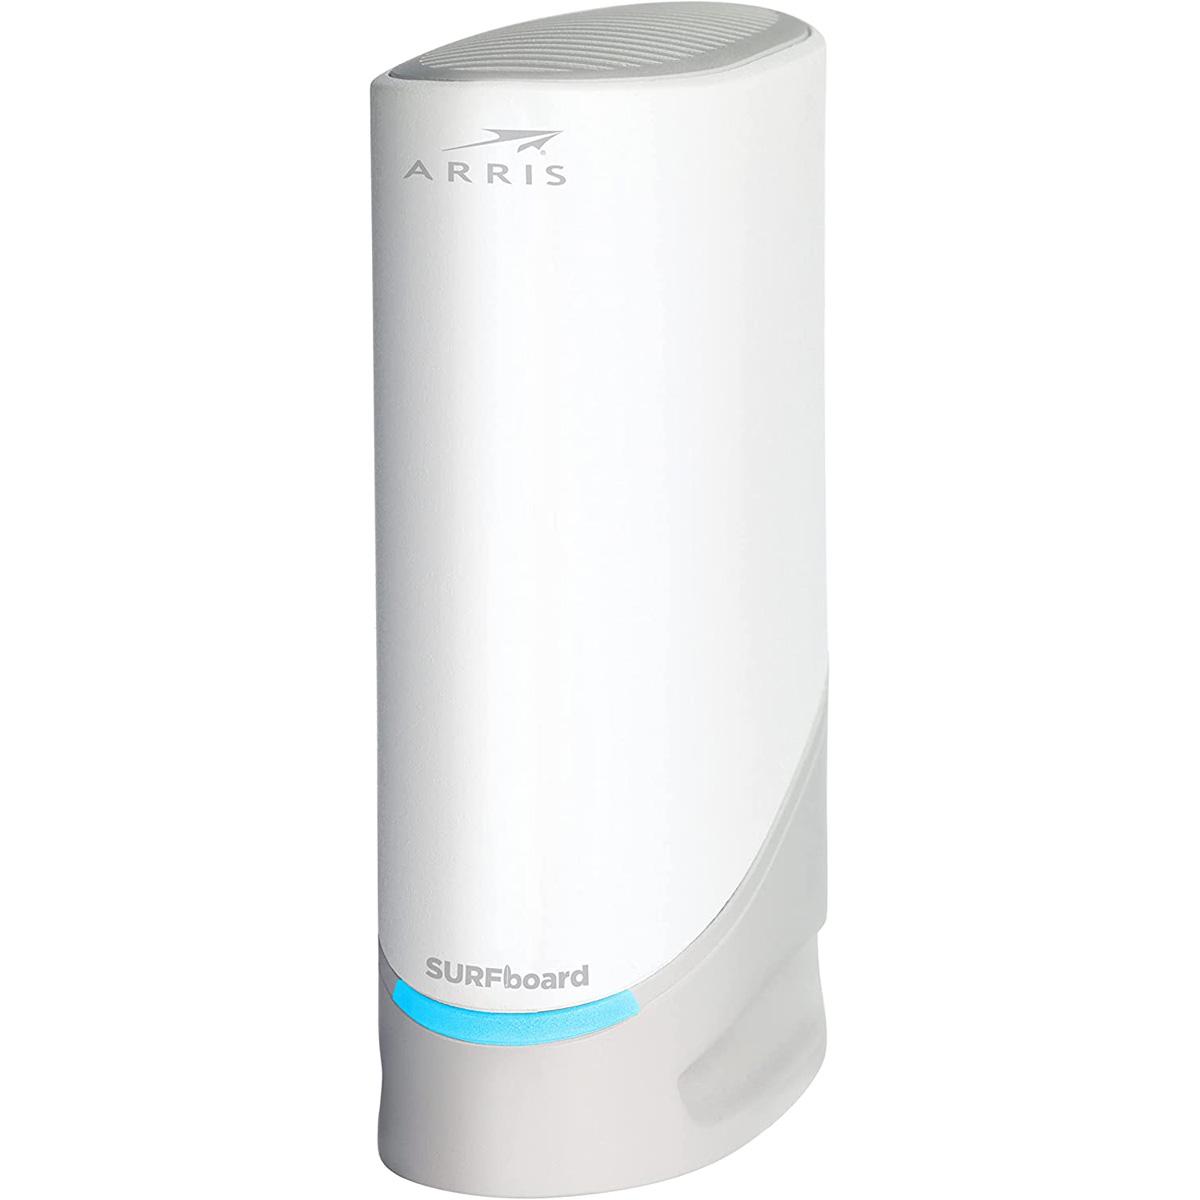 ARRIS Surfboard S33 DOCSIS 3.1 Modem for $146.88 Shipped